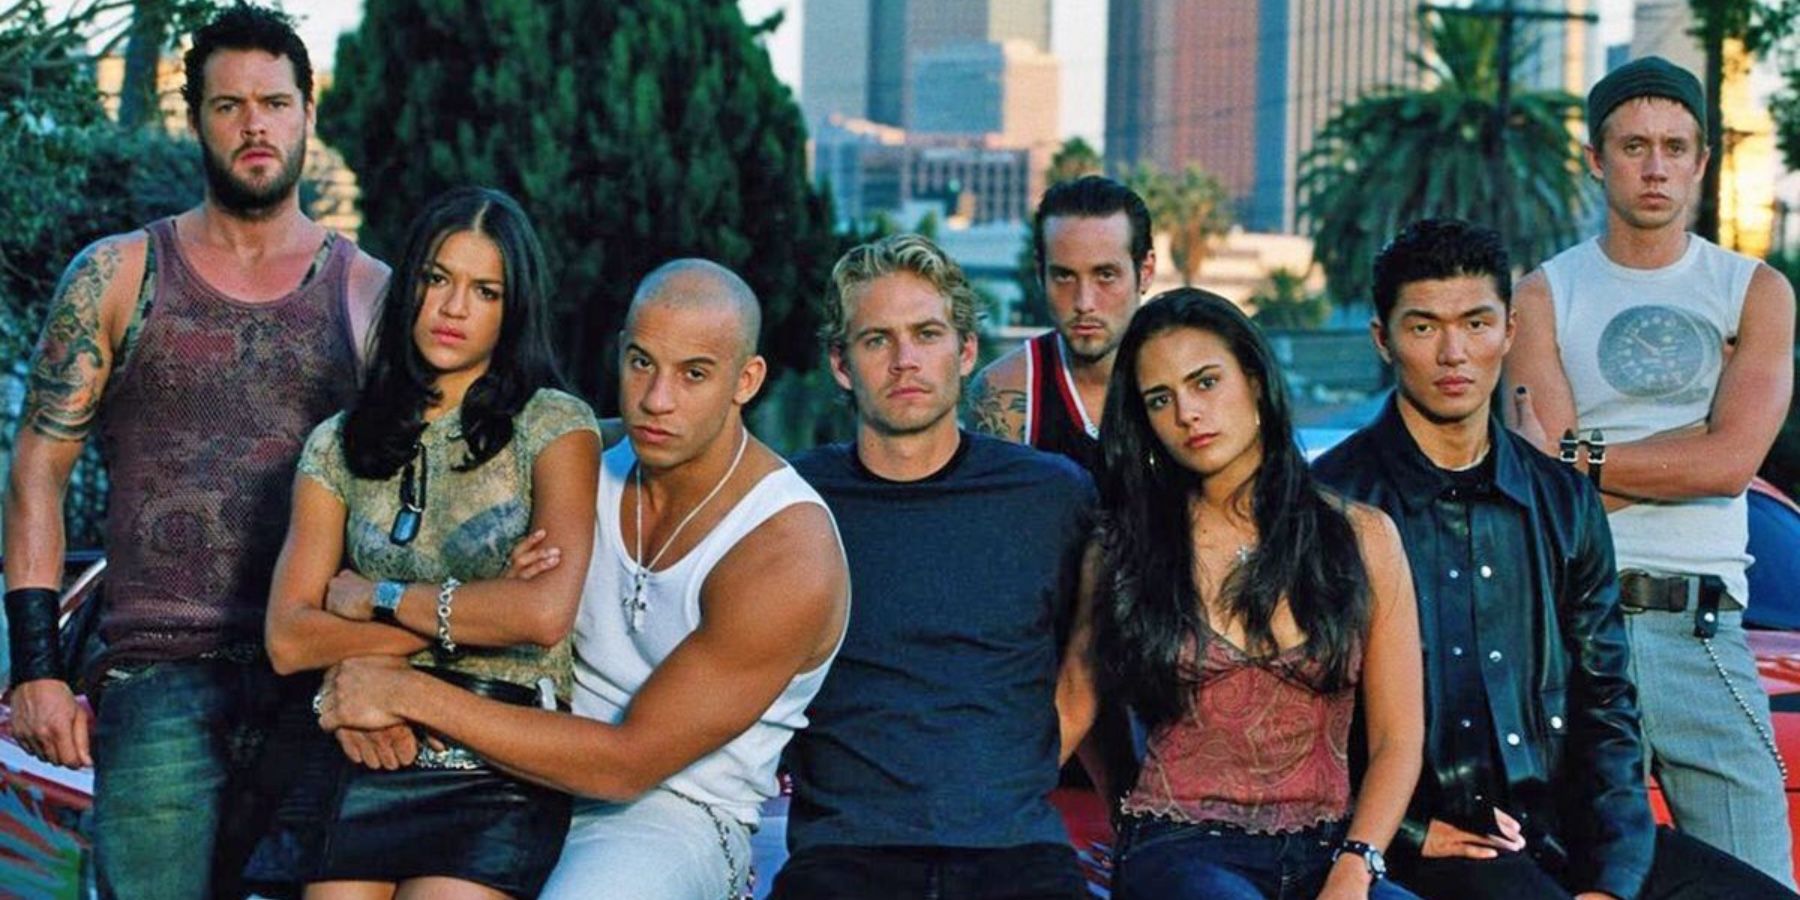 The-Fast-and-the-Furious-Vince-Letty-Dom-Brian-Leon-Mia-Johnny-Tran-and-Jesse